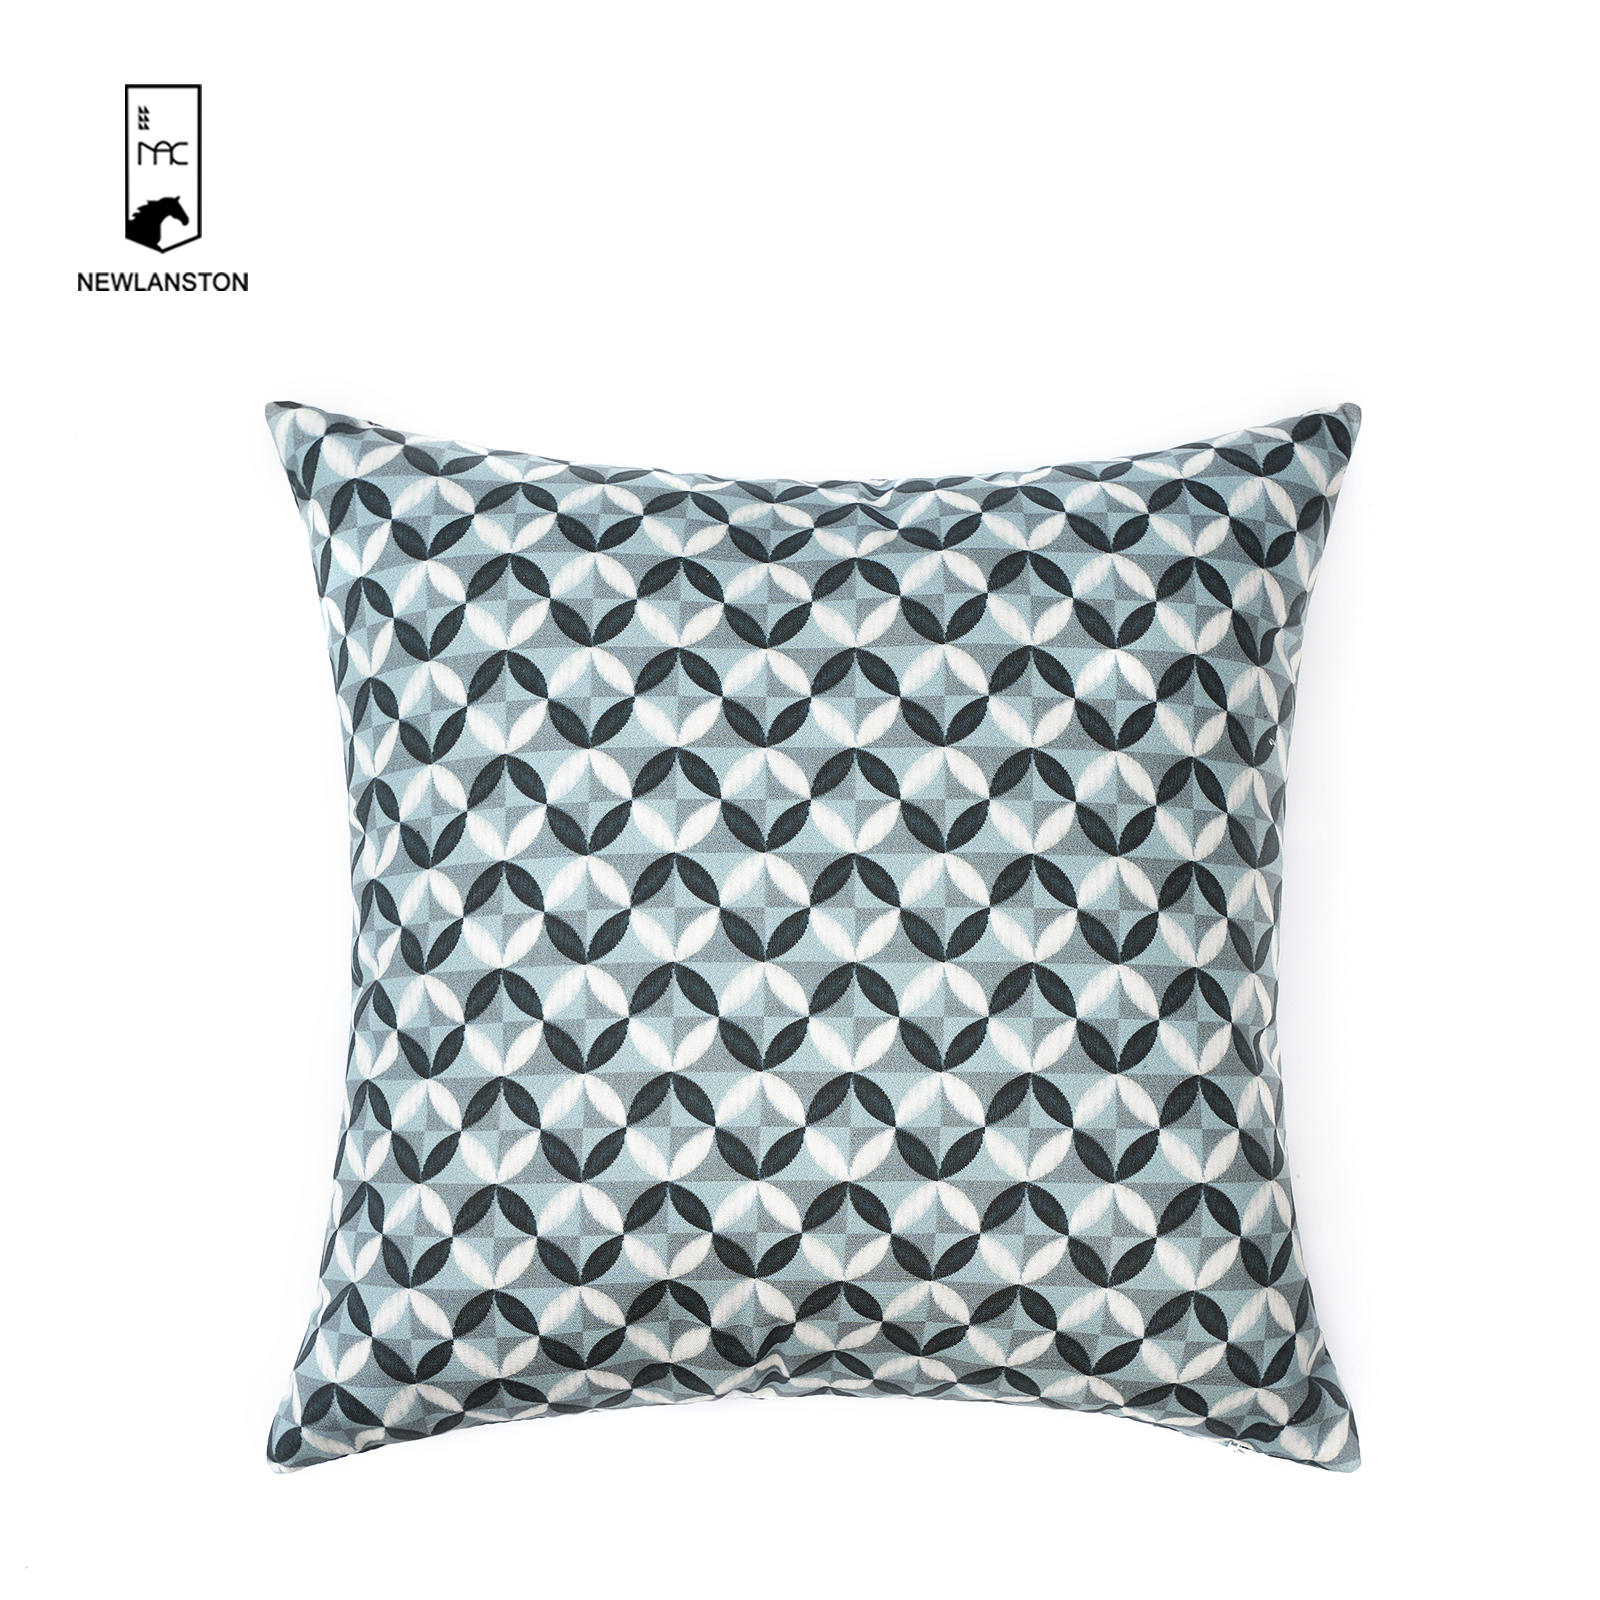 45*45 Digital printed recycled cotton Geometric style Cushion cover 